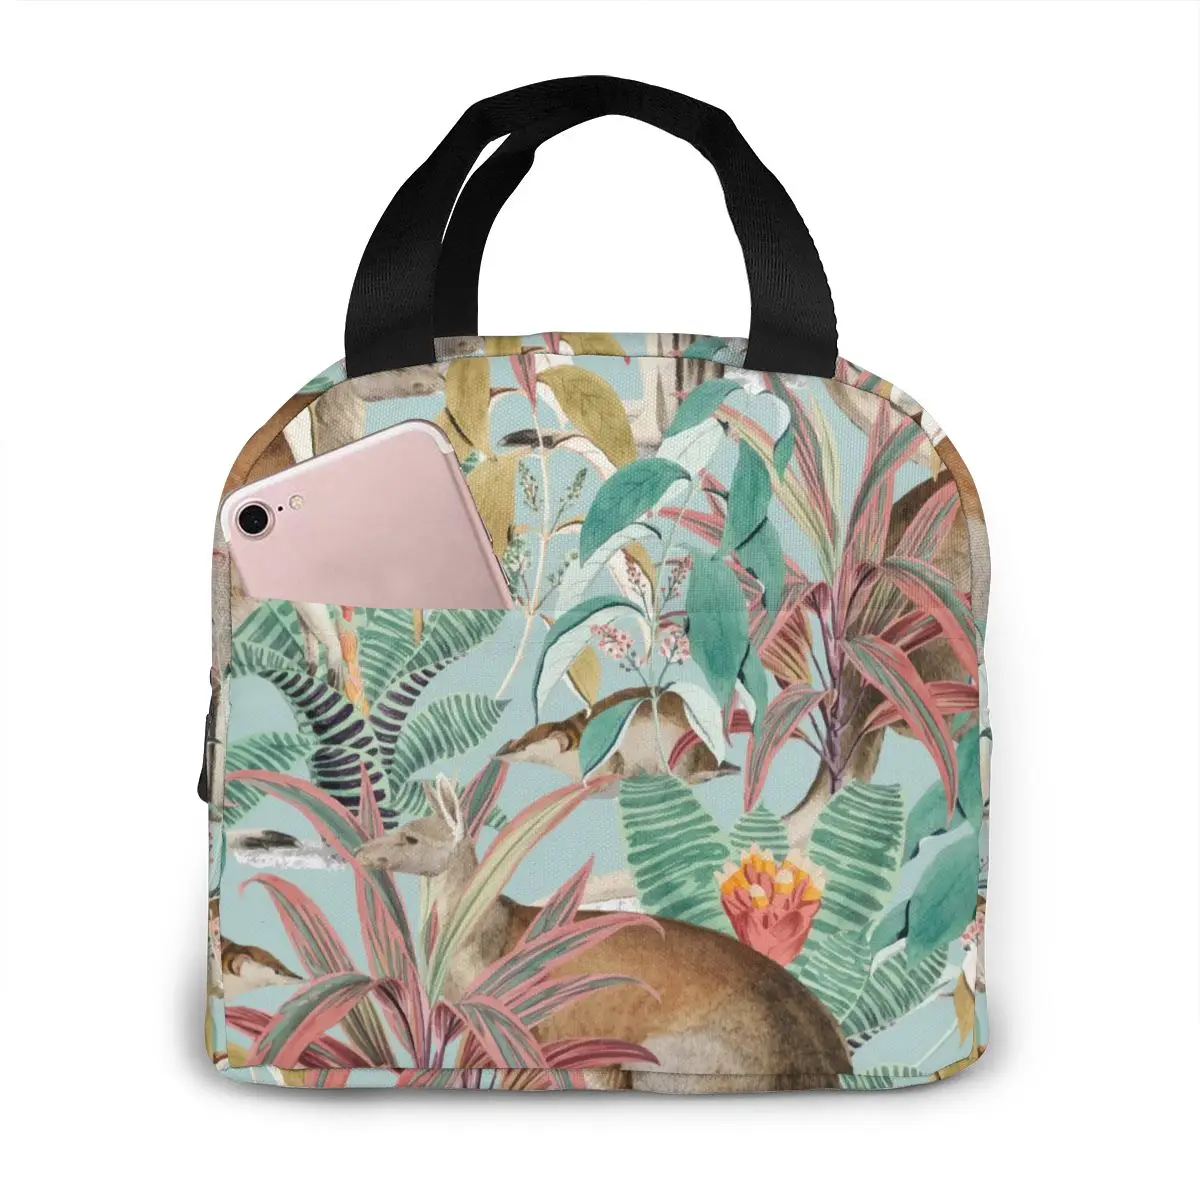 

Kangaroo Jungle Leaves Lunch Bag Portable Insulated Thermal Cooler Bento Lunch Box Tote Picnic Storage Bag Pouch